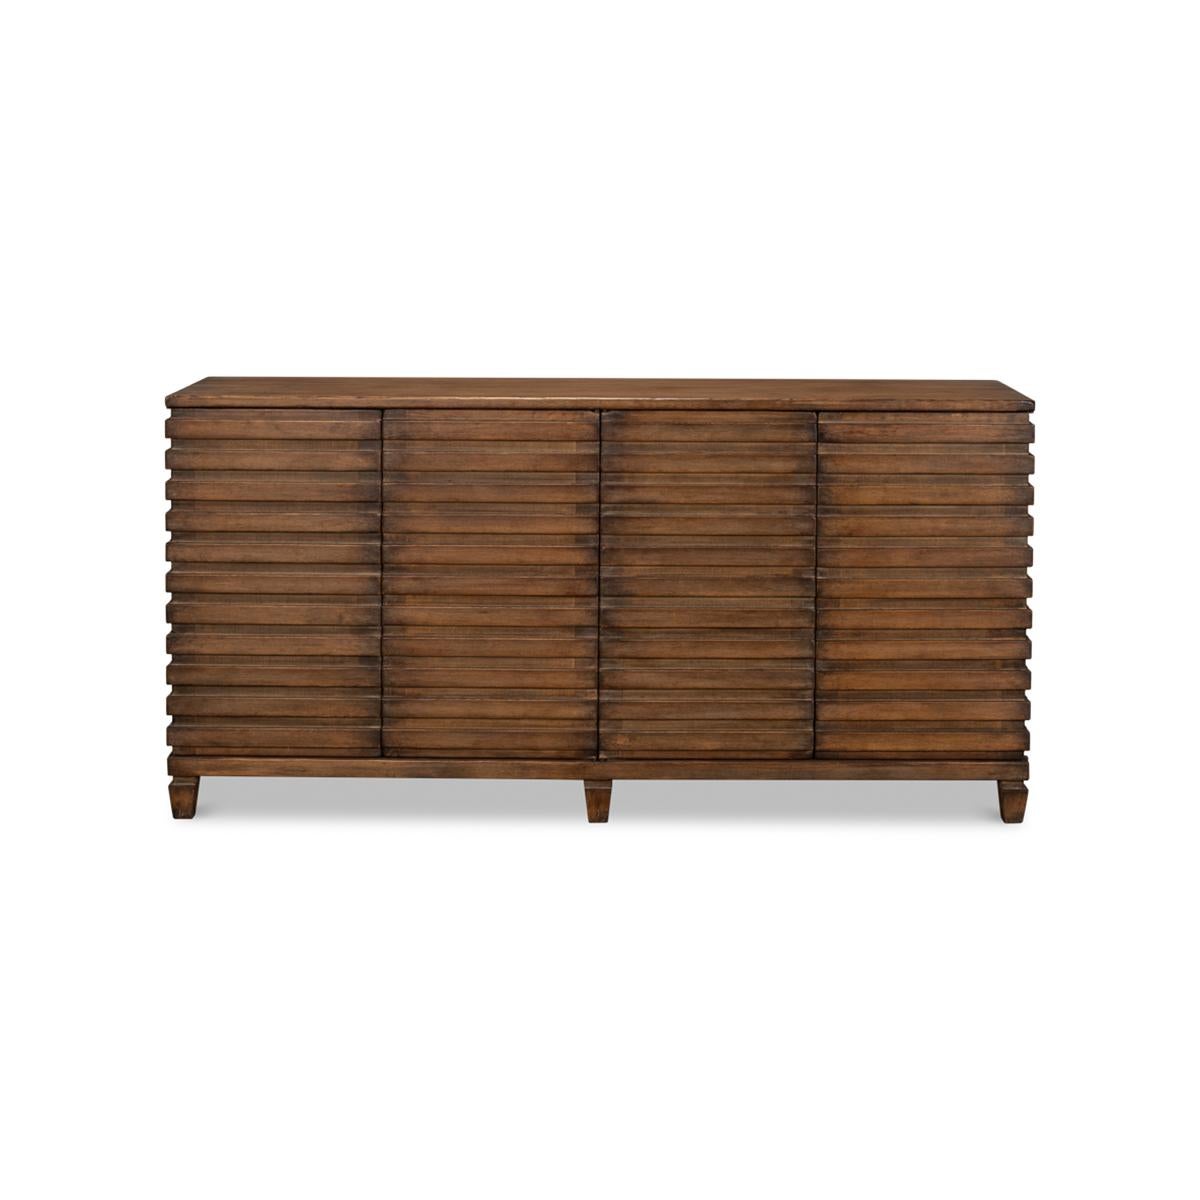 Modern Ribbed sideboard of pine in a mahogany-stained finish. The buffet cabinet with four doors and interior shelves and a geometric ribbed design that wraps around each side, with square tapered legs.

Dimensions: 72